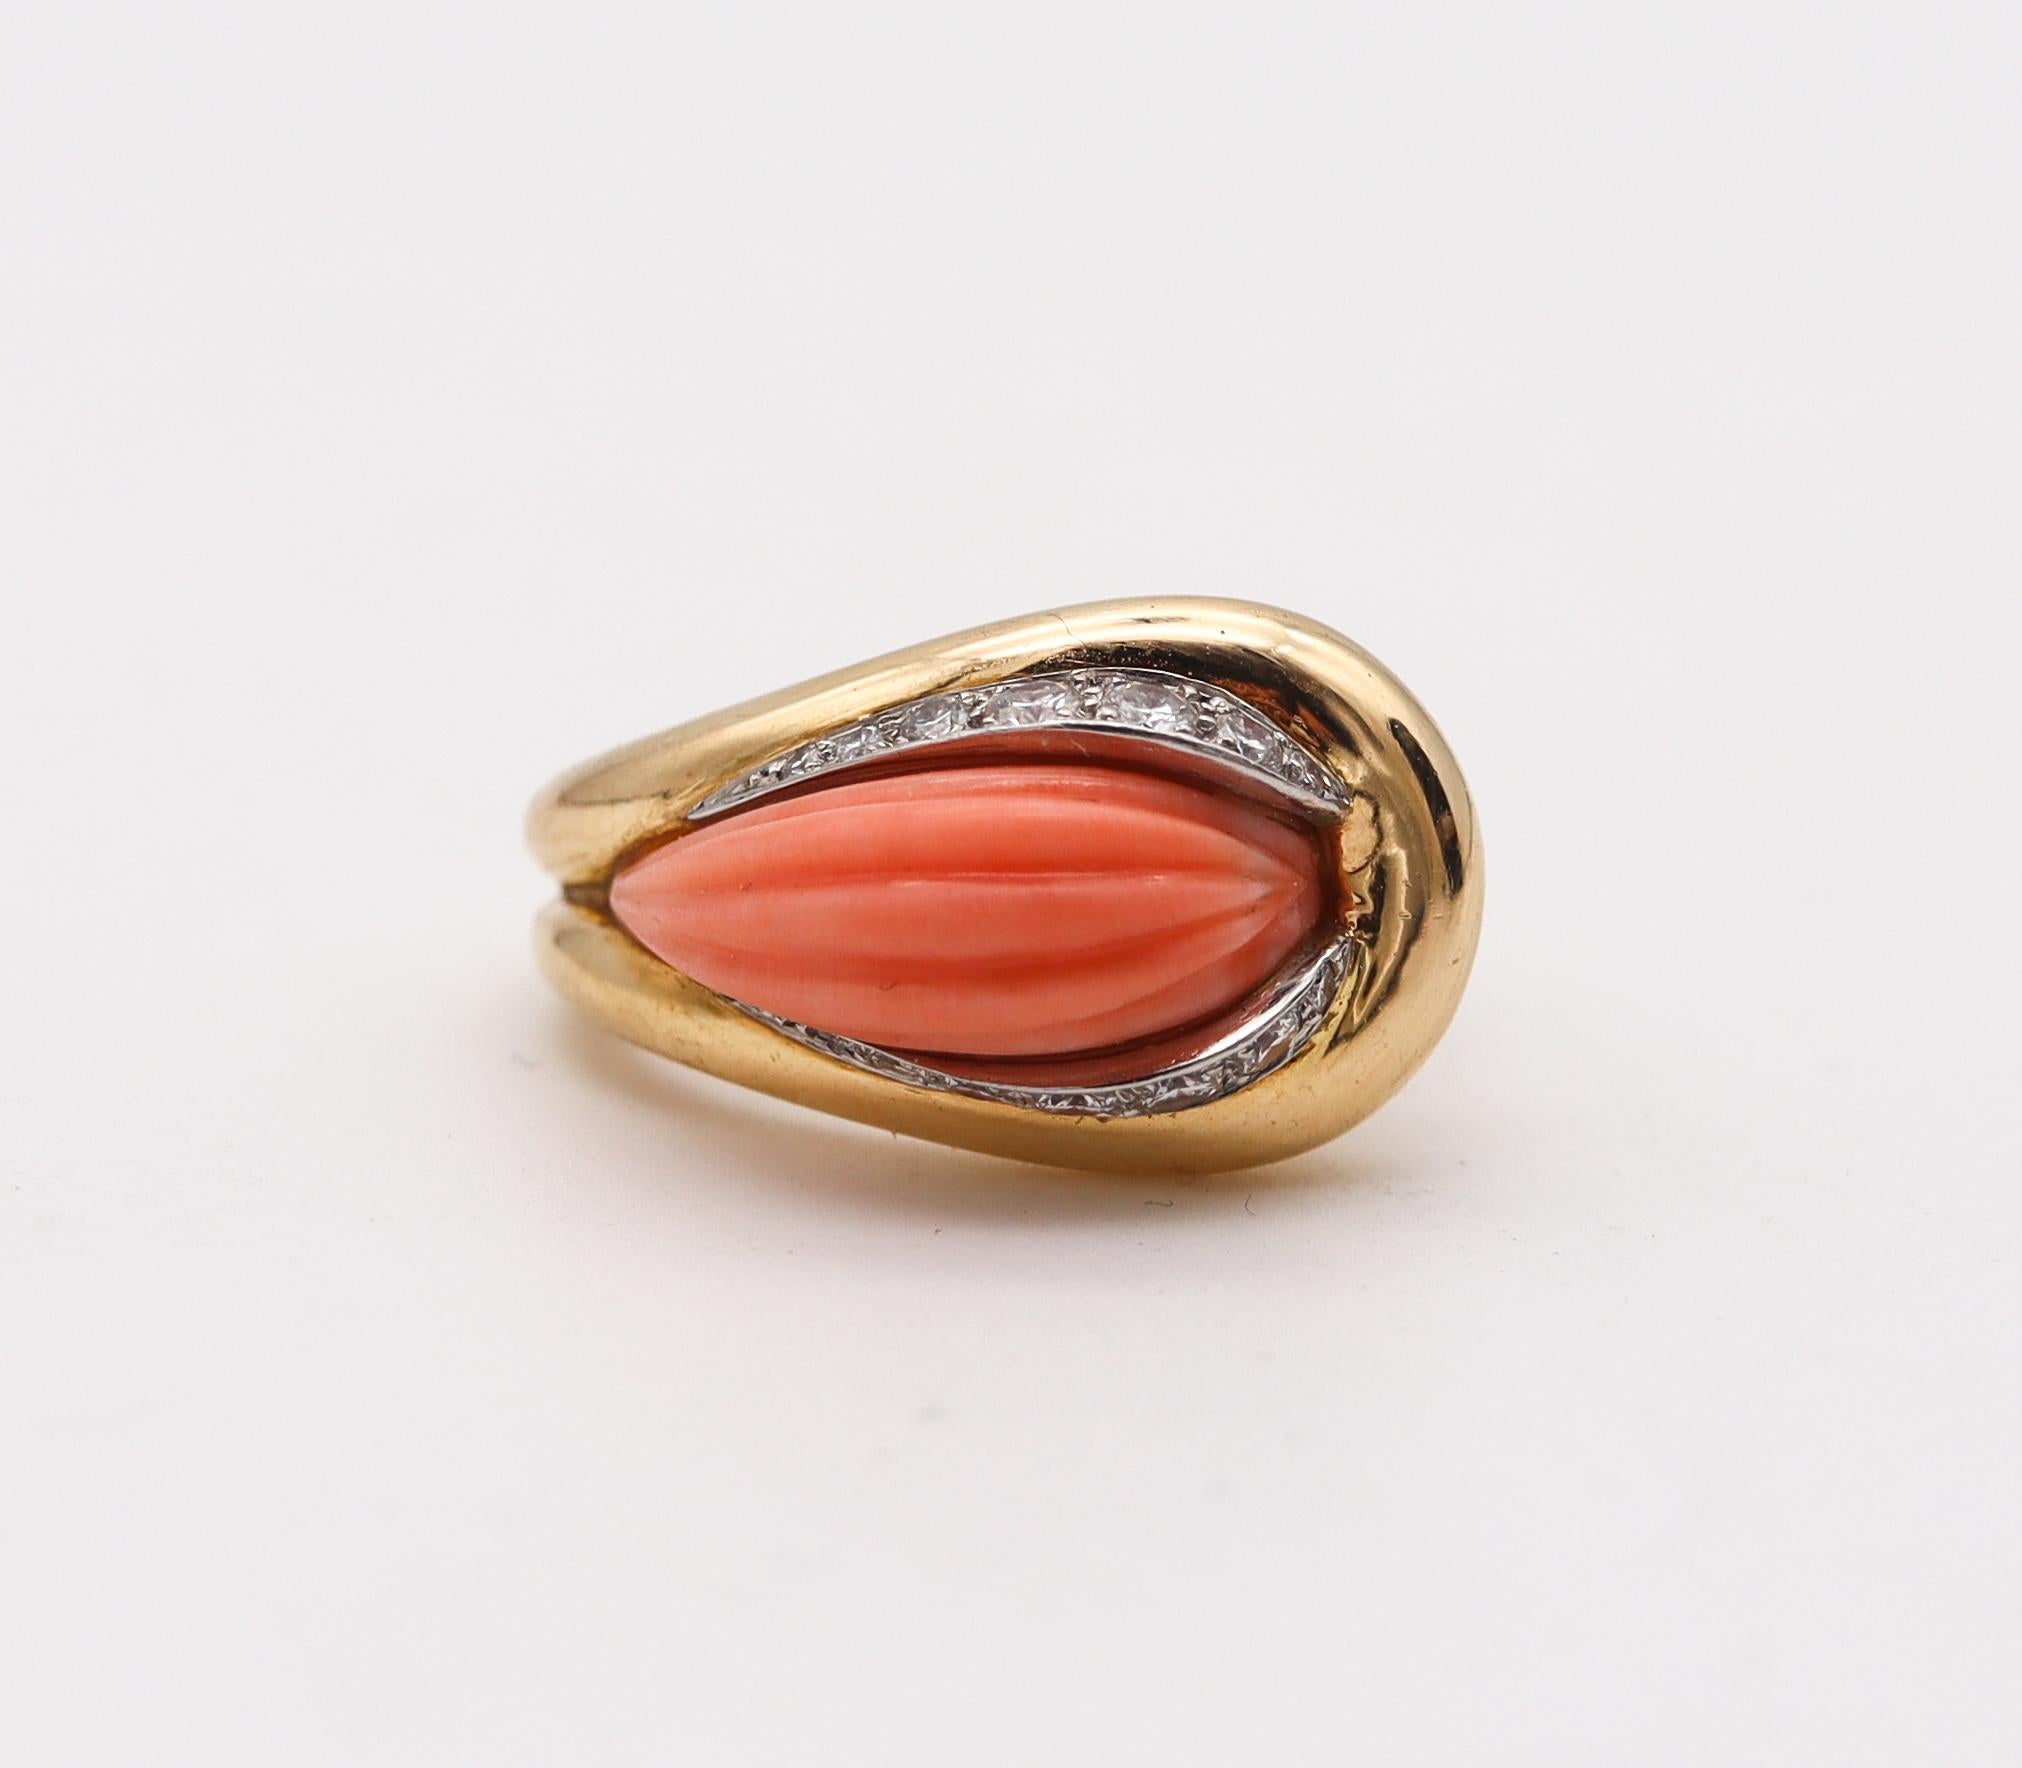 Modernist Mauboussin 1970 Paris Fluted Coral Ring in 18kt Gold with 4.35 Ctw Diamonds For Sale